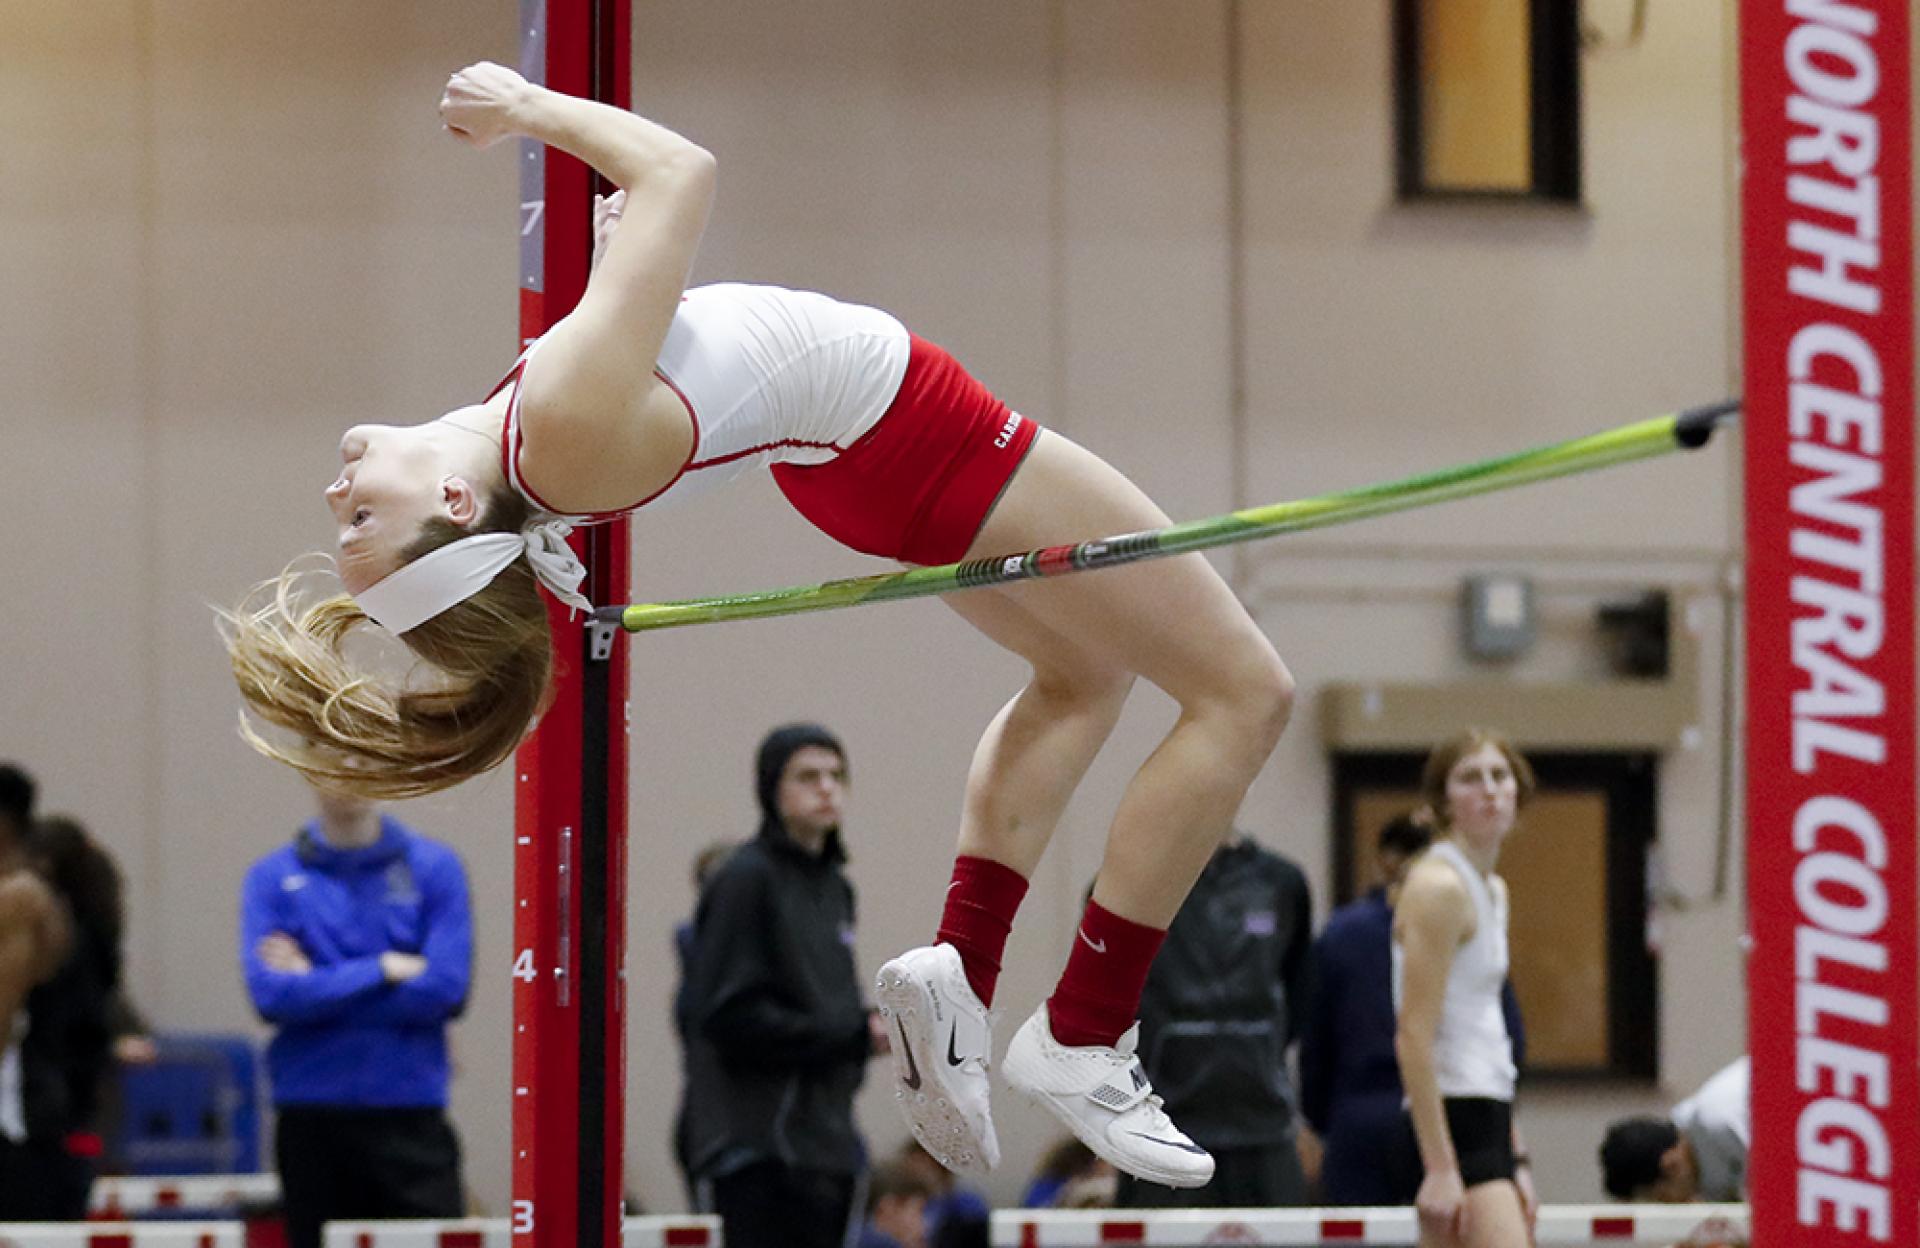 High jumper Taiah Gallisath clears the bar during a North Central College women's track meet.